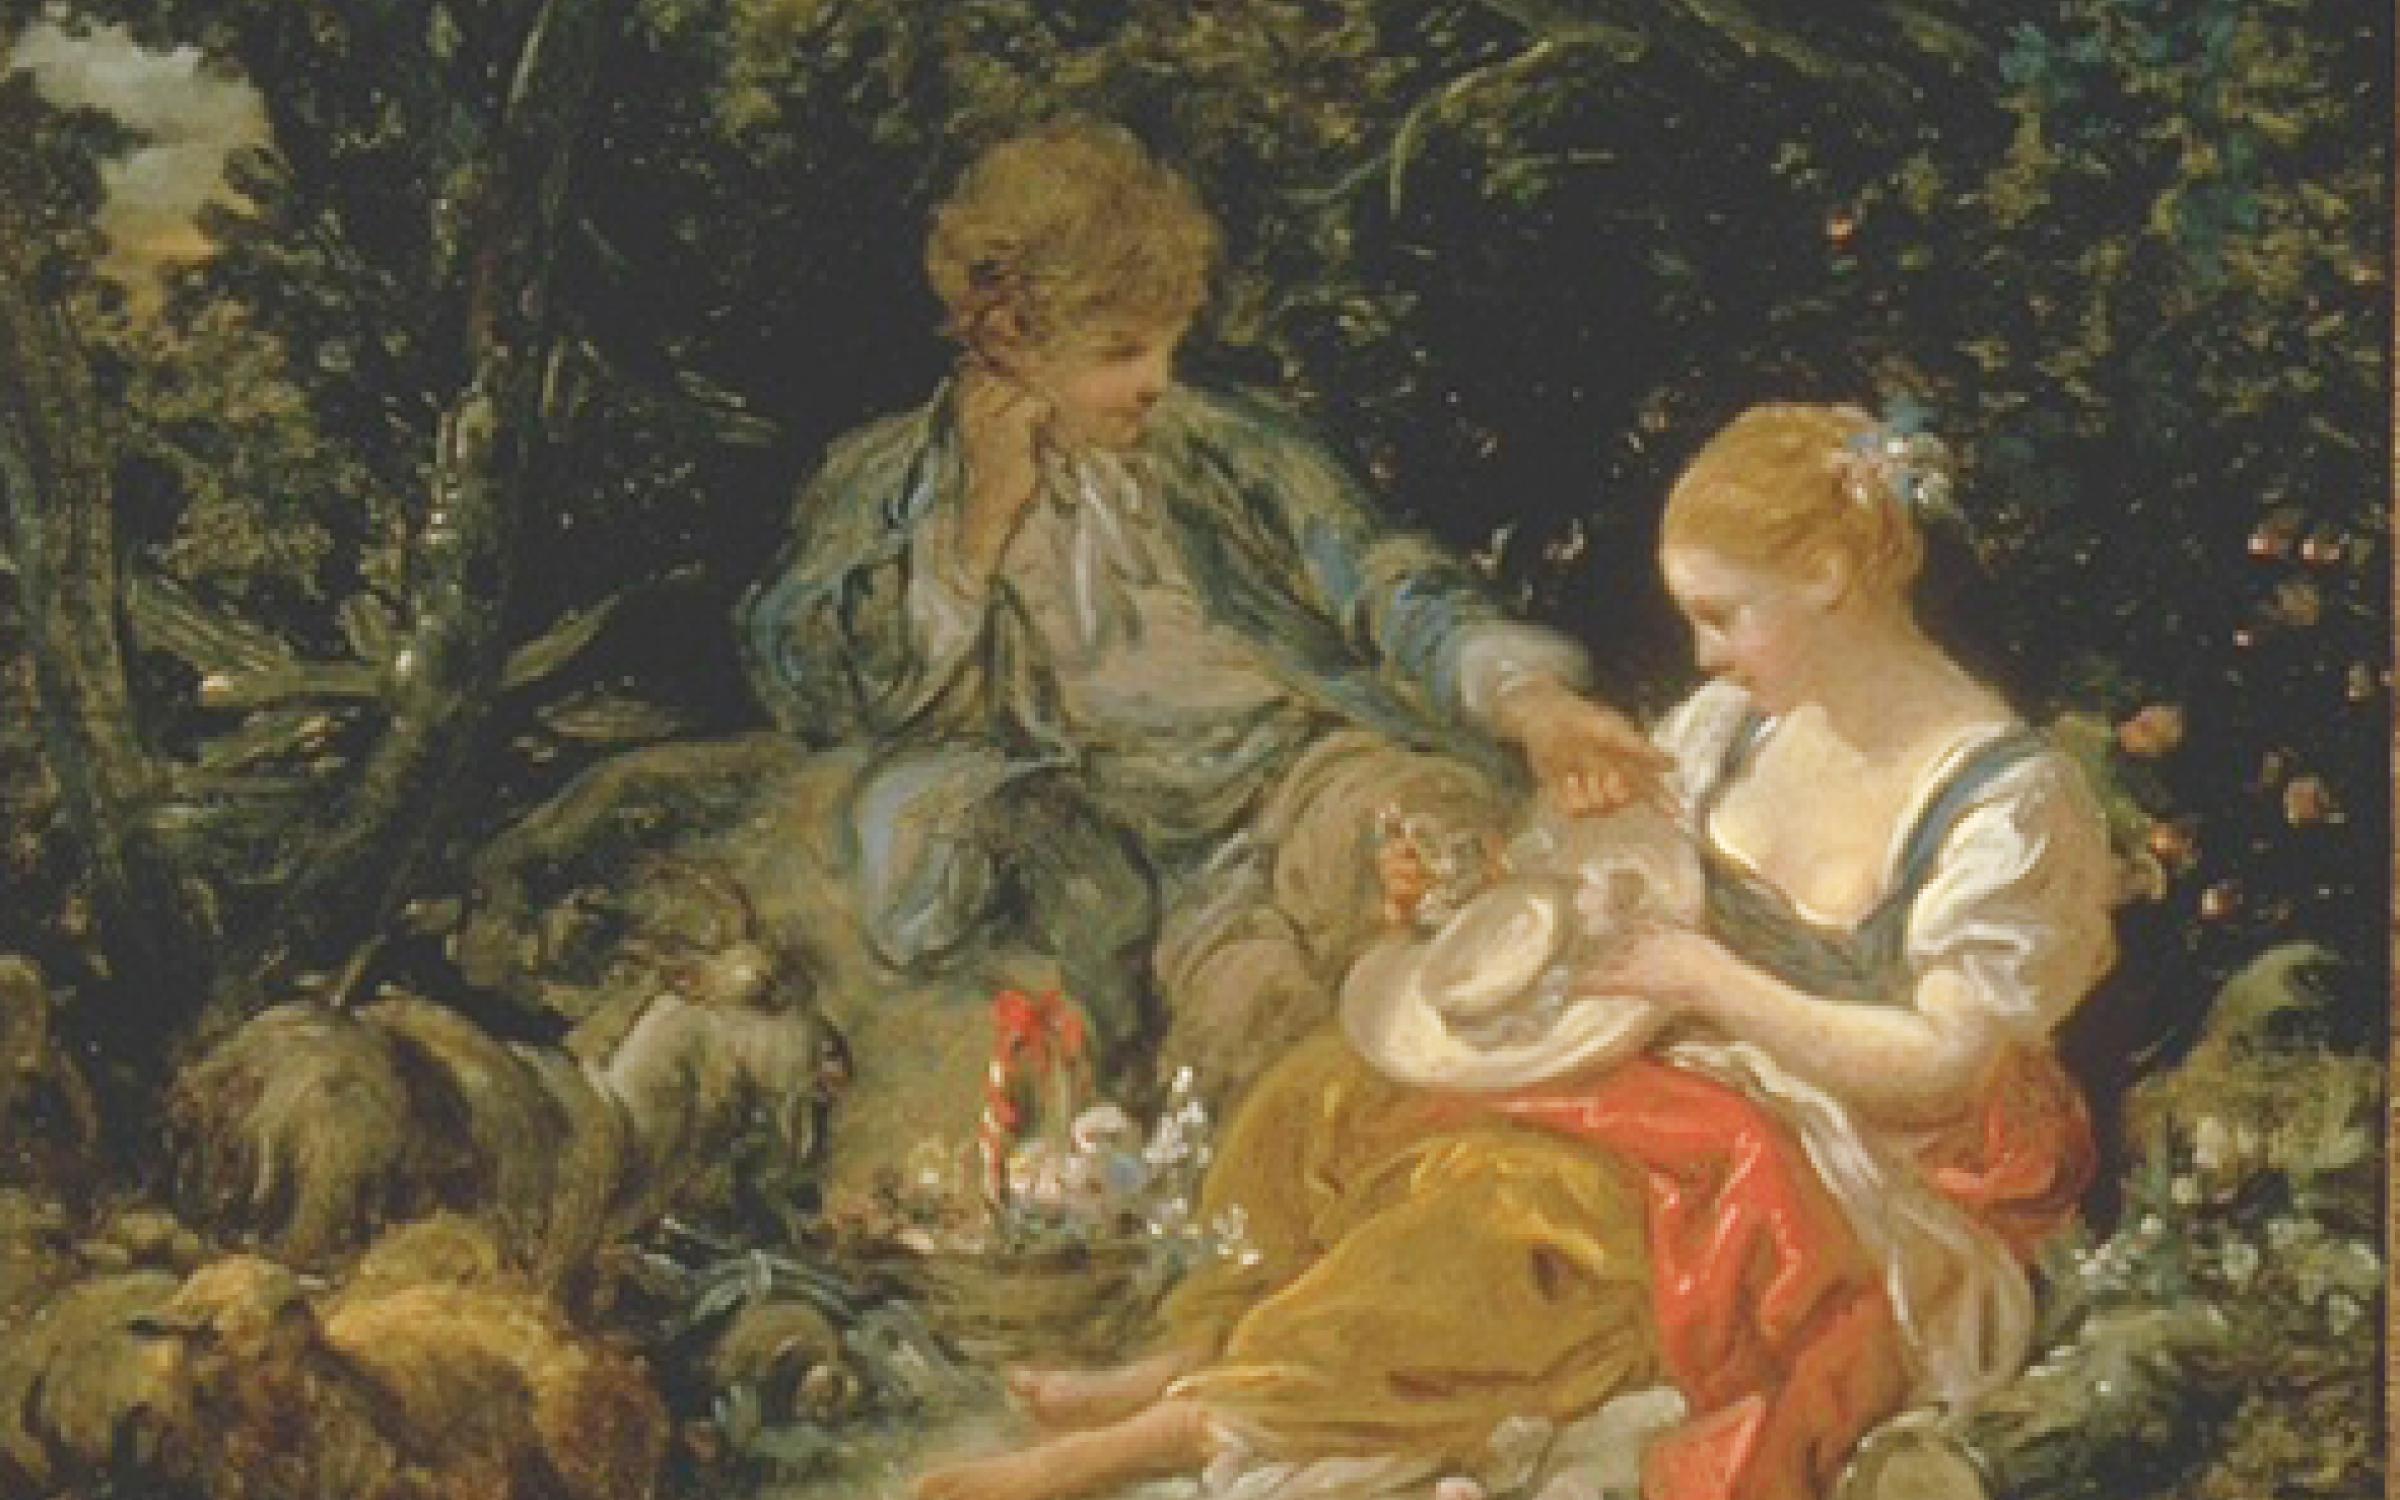 A painting of a couple in the forest